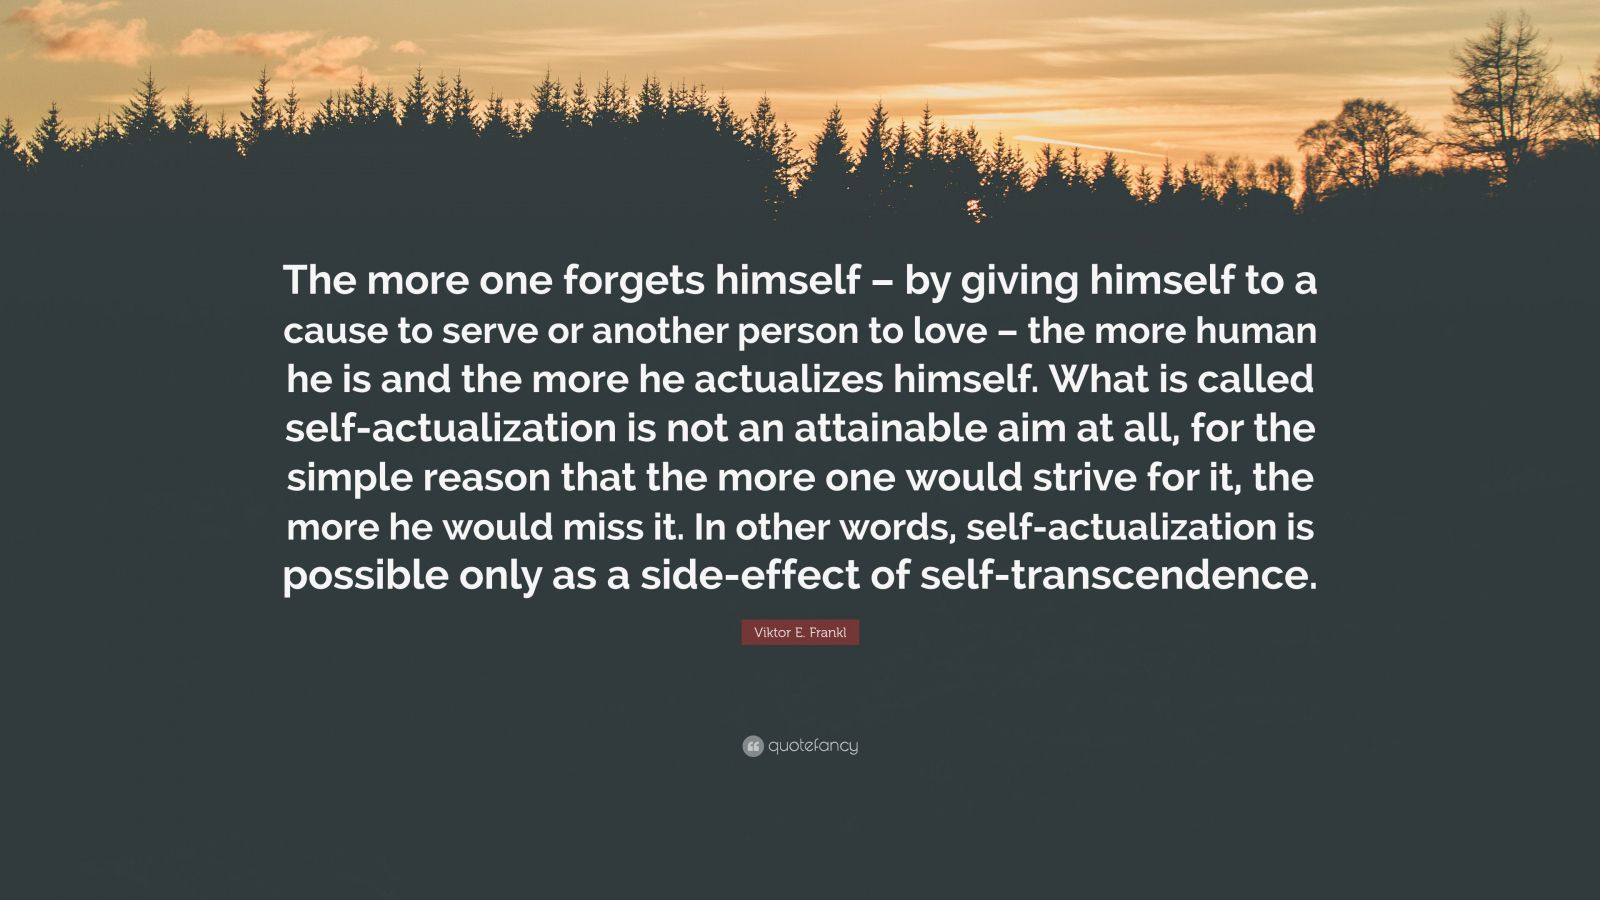 Viktor Frankl: Self-Actualization is not the goal